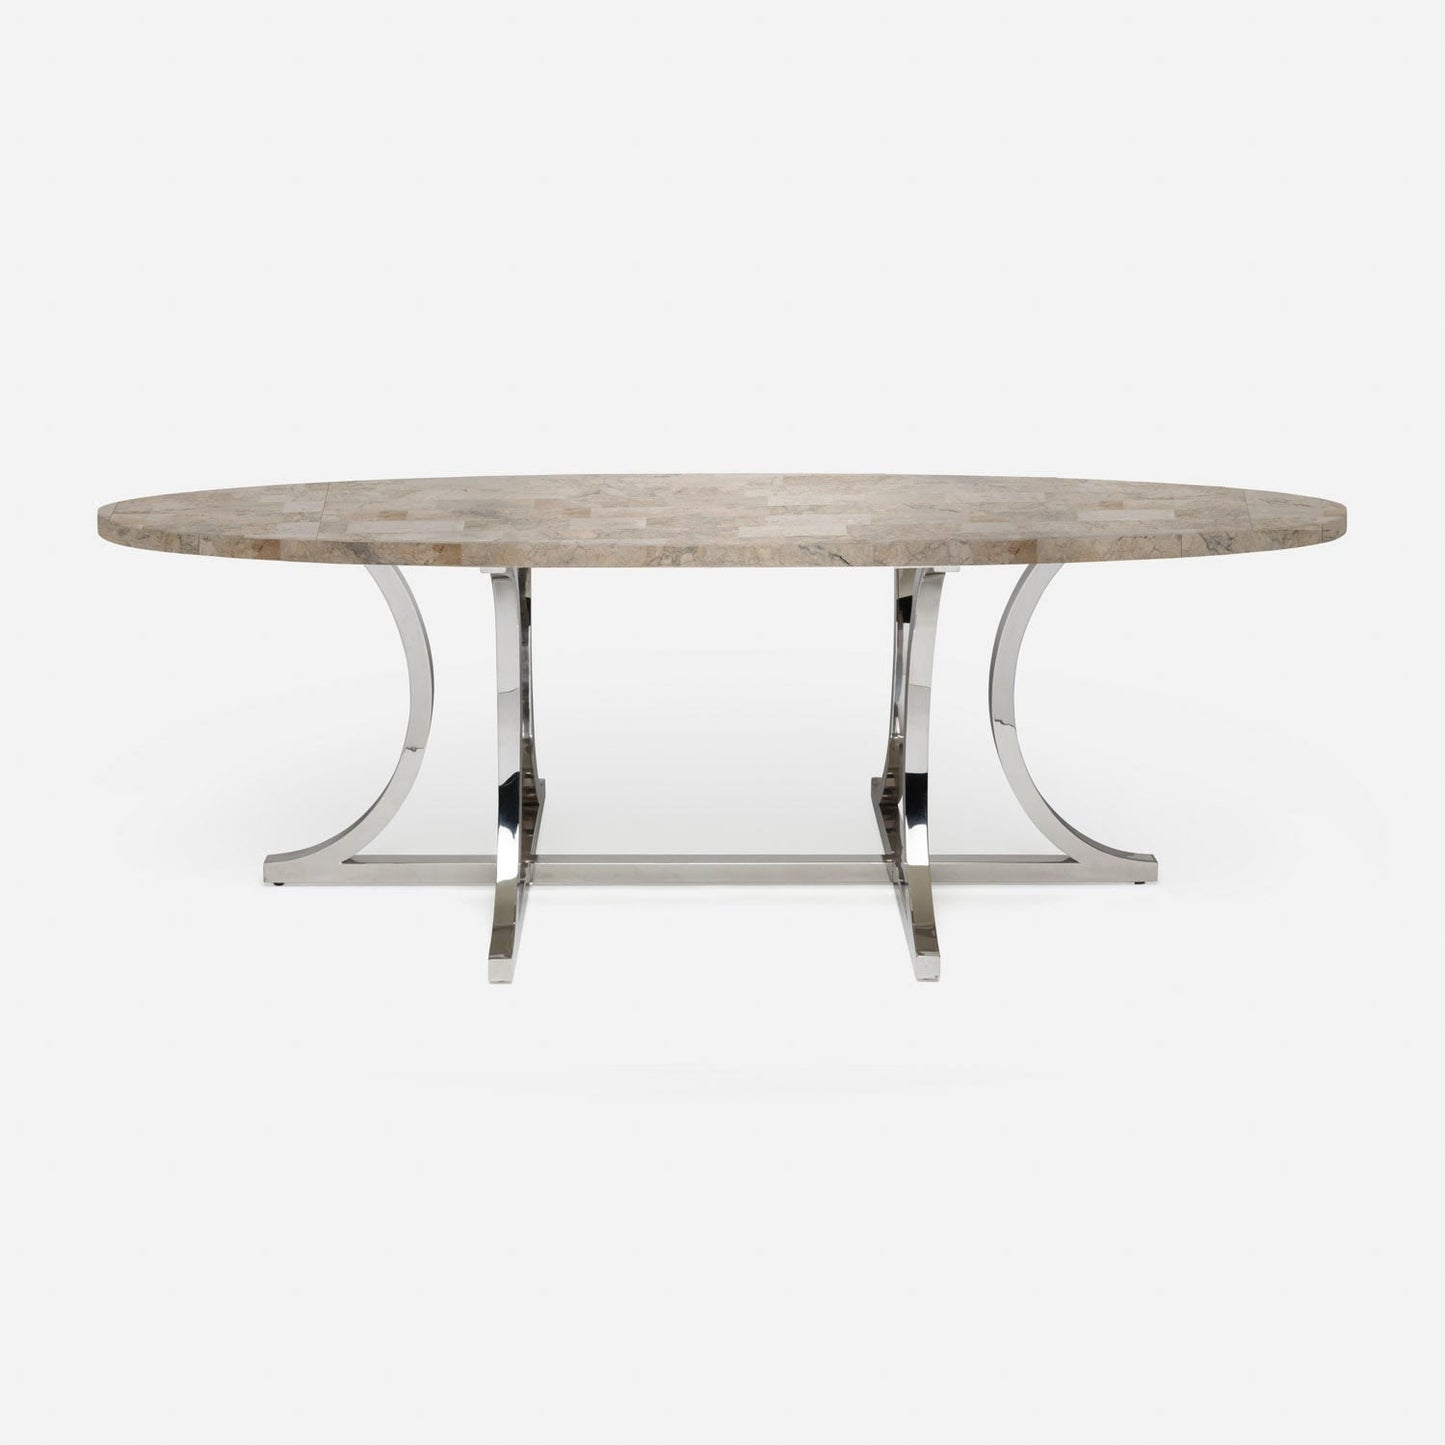 Made Goods Leighton 72" x 42" x 30" Polished Silver Steel Dinning Table With Oval Warm Gray Marble Table Top